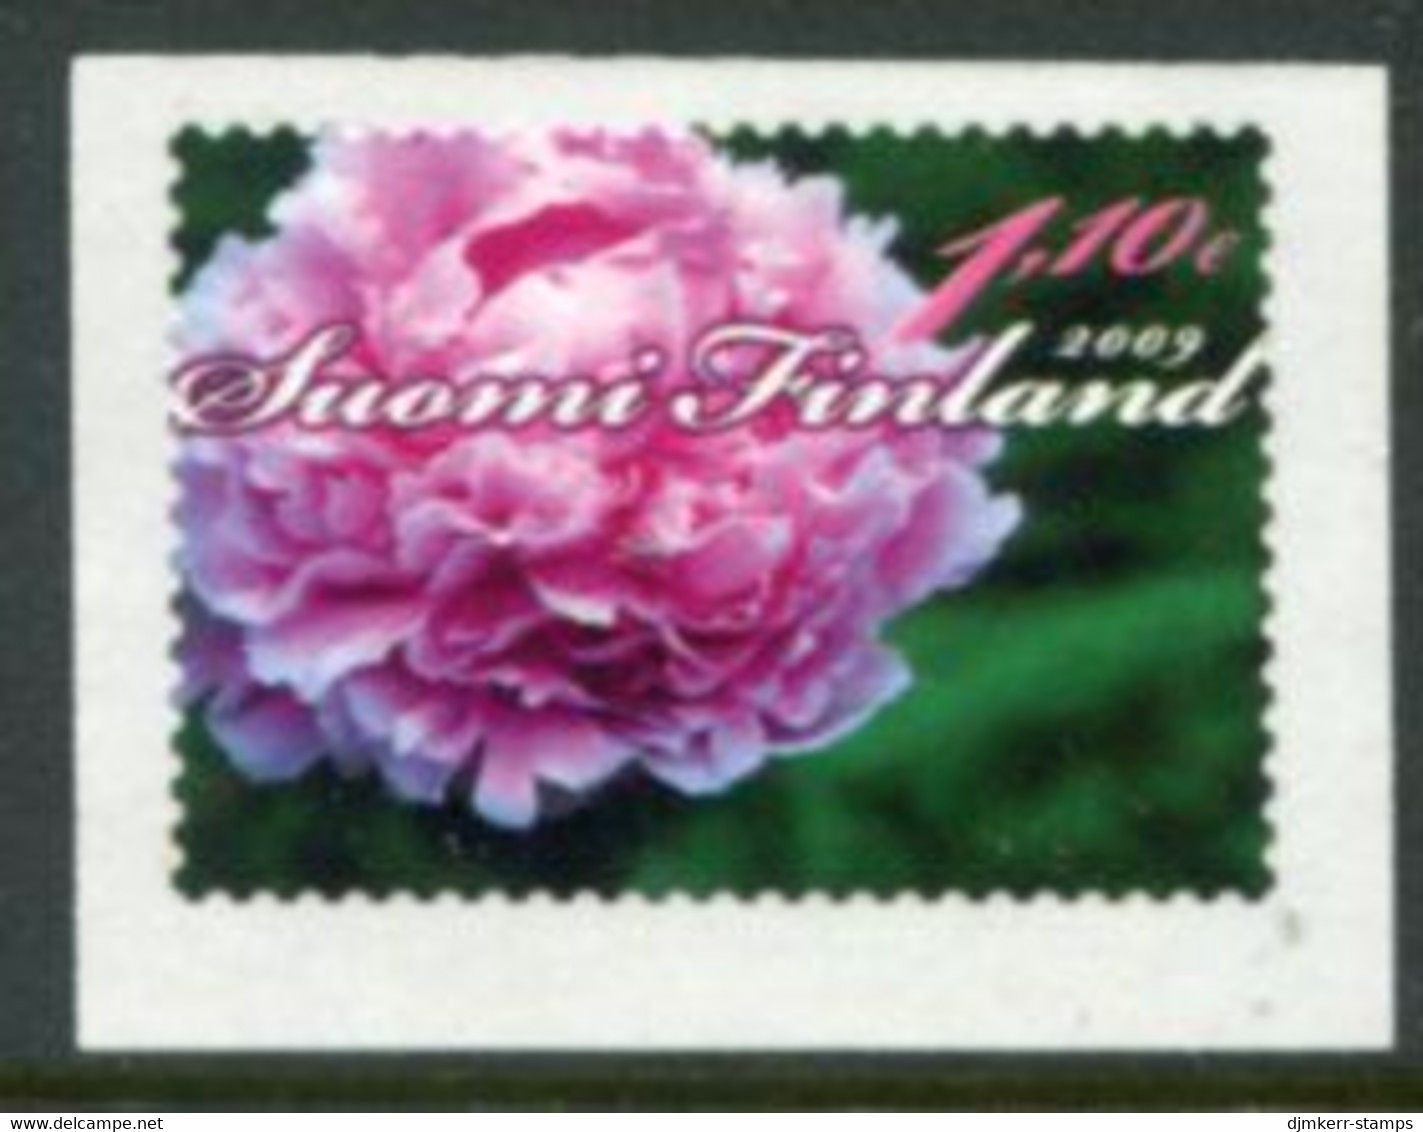 FINLAND 2009 Flower: Rose MNH / **.  Michel 1958 - Unused Stamps